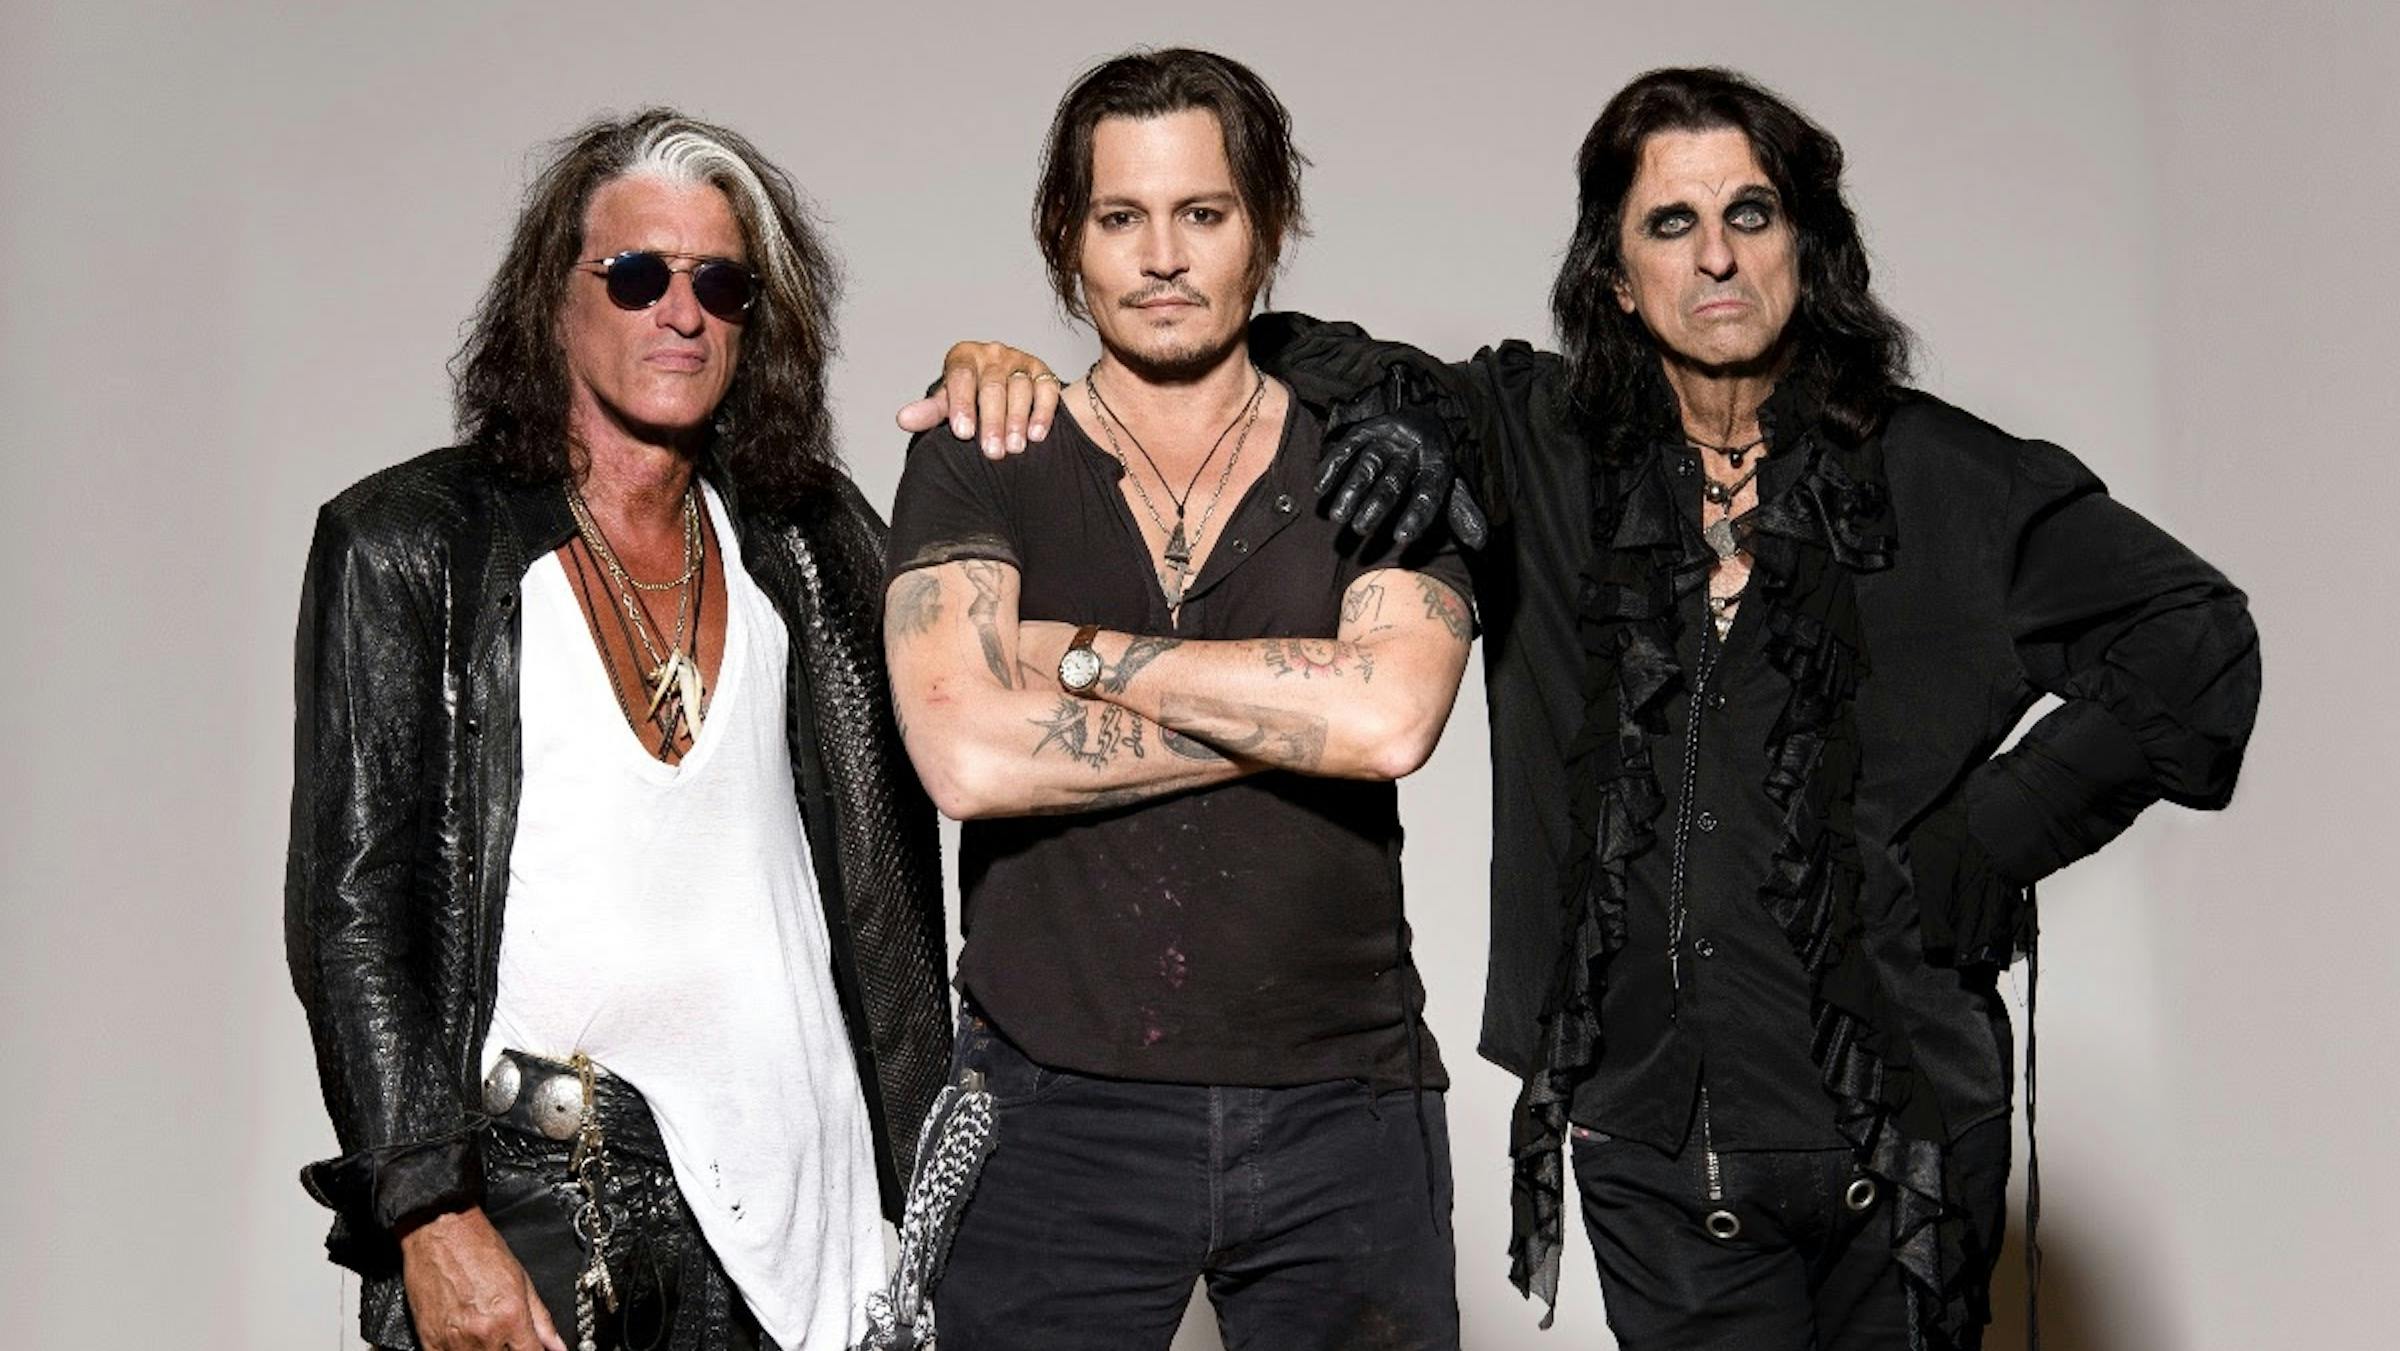 The Hollywood Vampires (Johnny Depp, Alice Cooper, Joe Perry) Announce U.S. Tour Dates